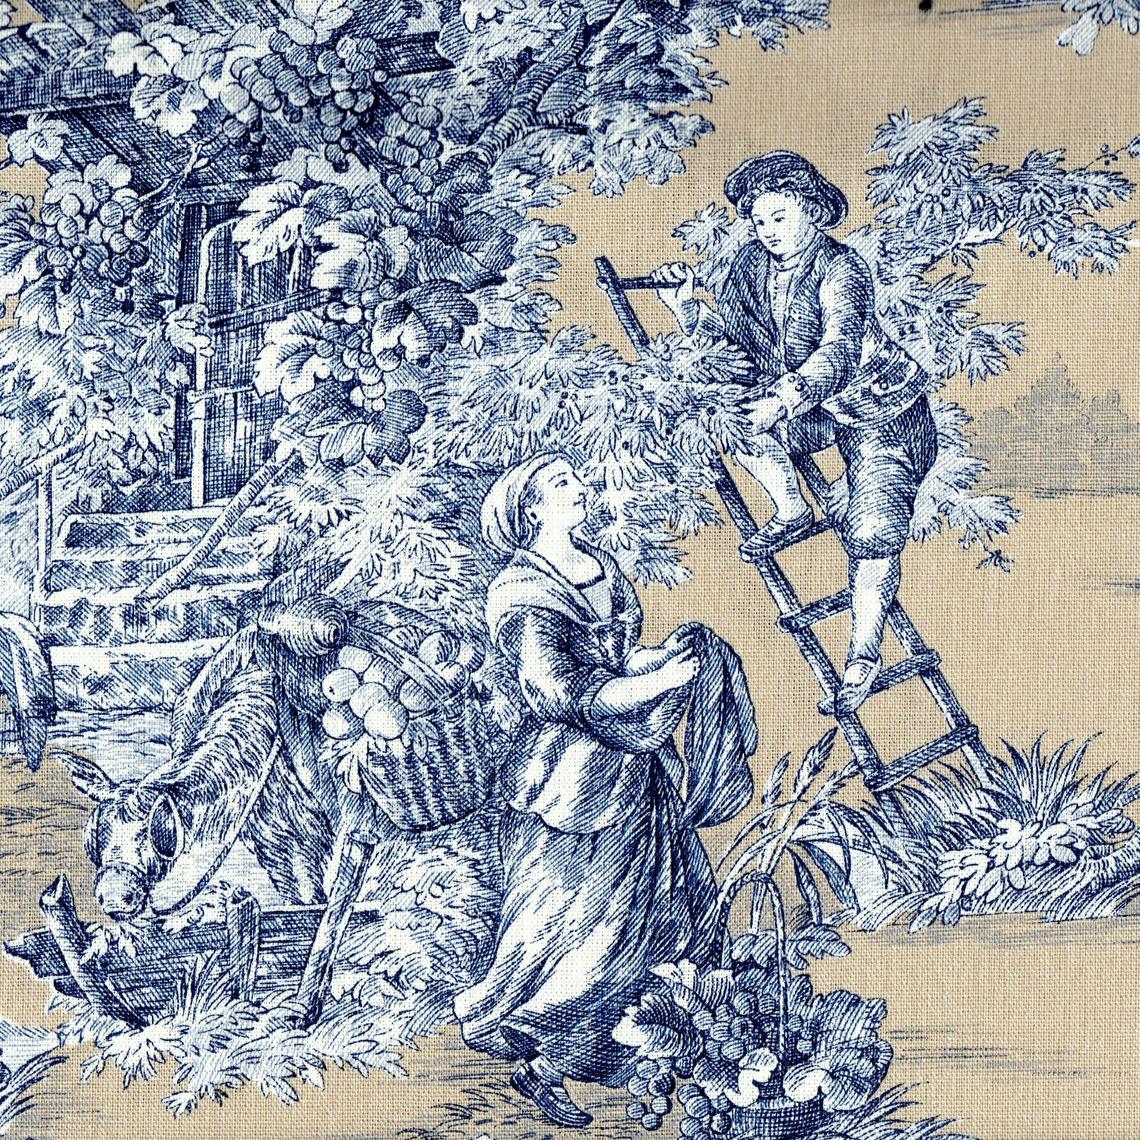 duvet cover in pastorale #88 blue on beige french country toile